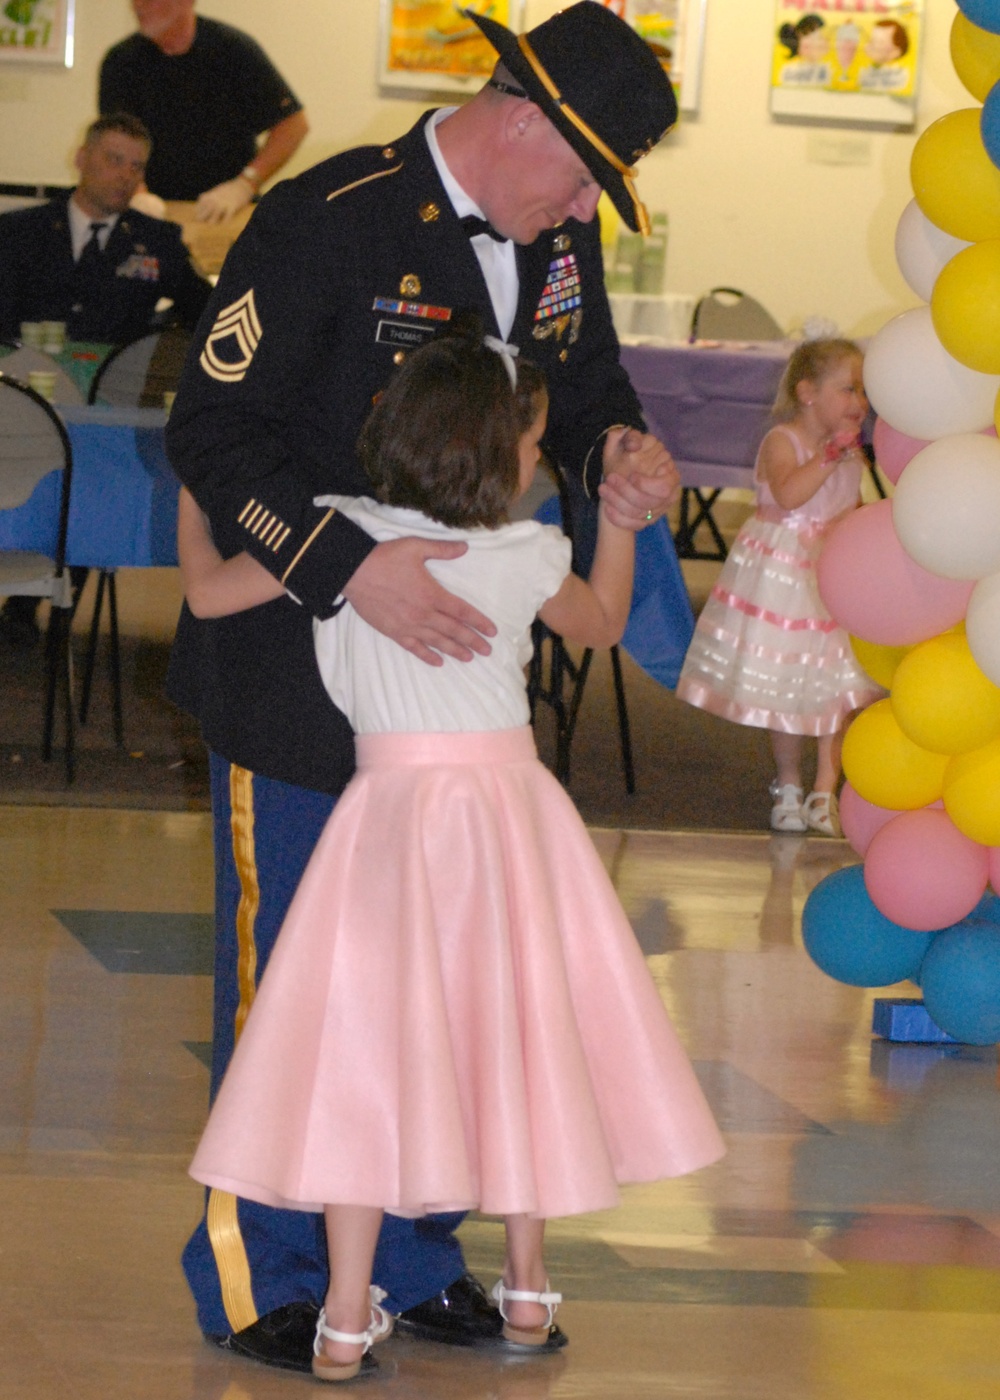 Armed Services YMCA brings the 50’s to Fairbanks